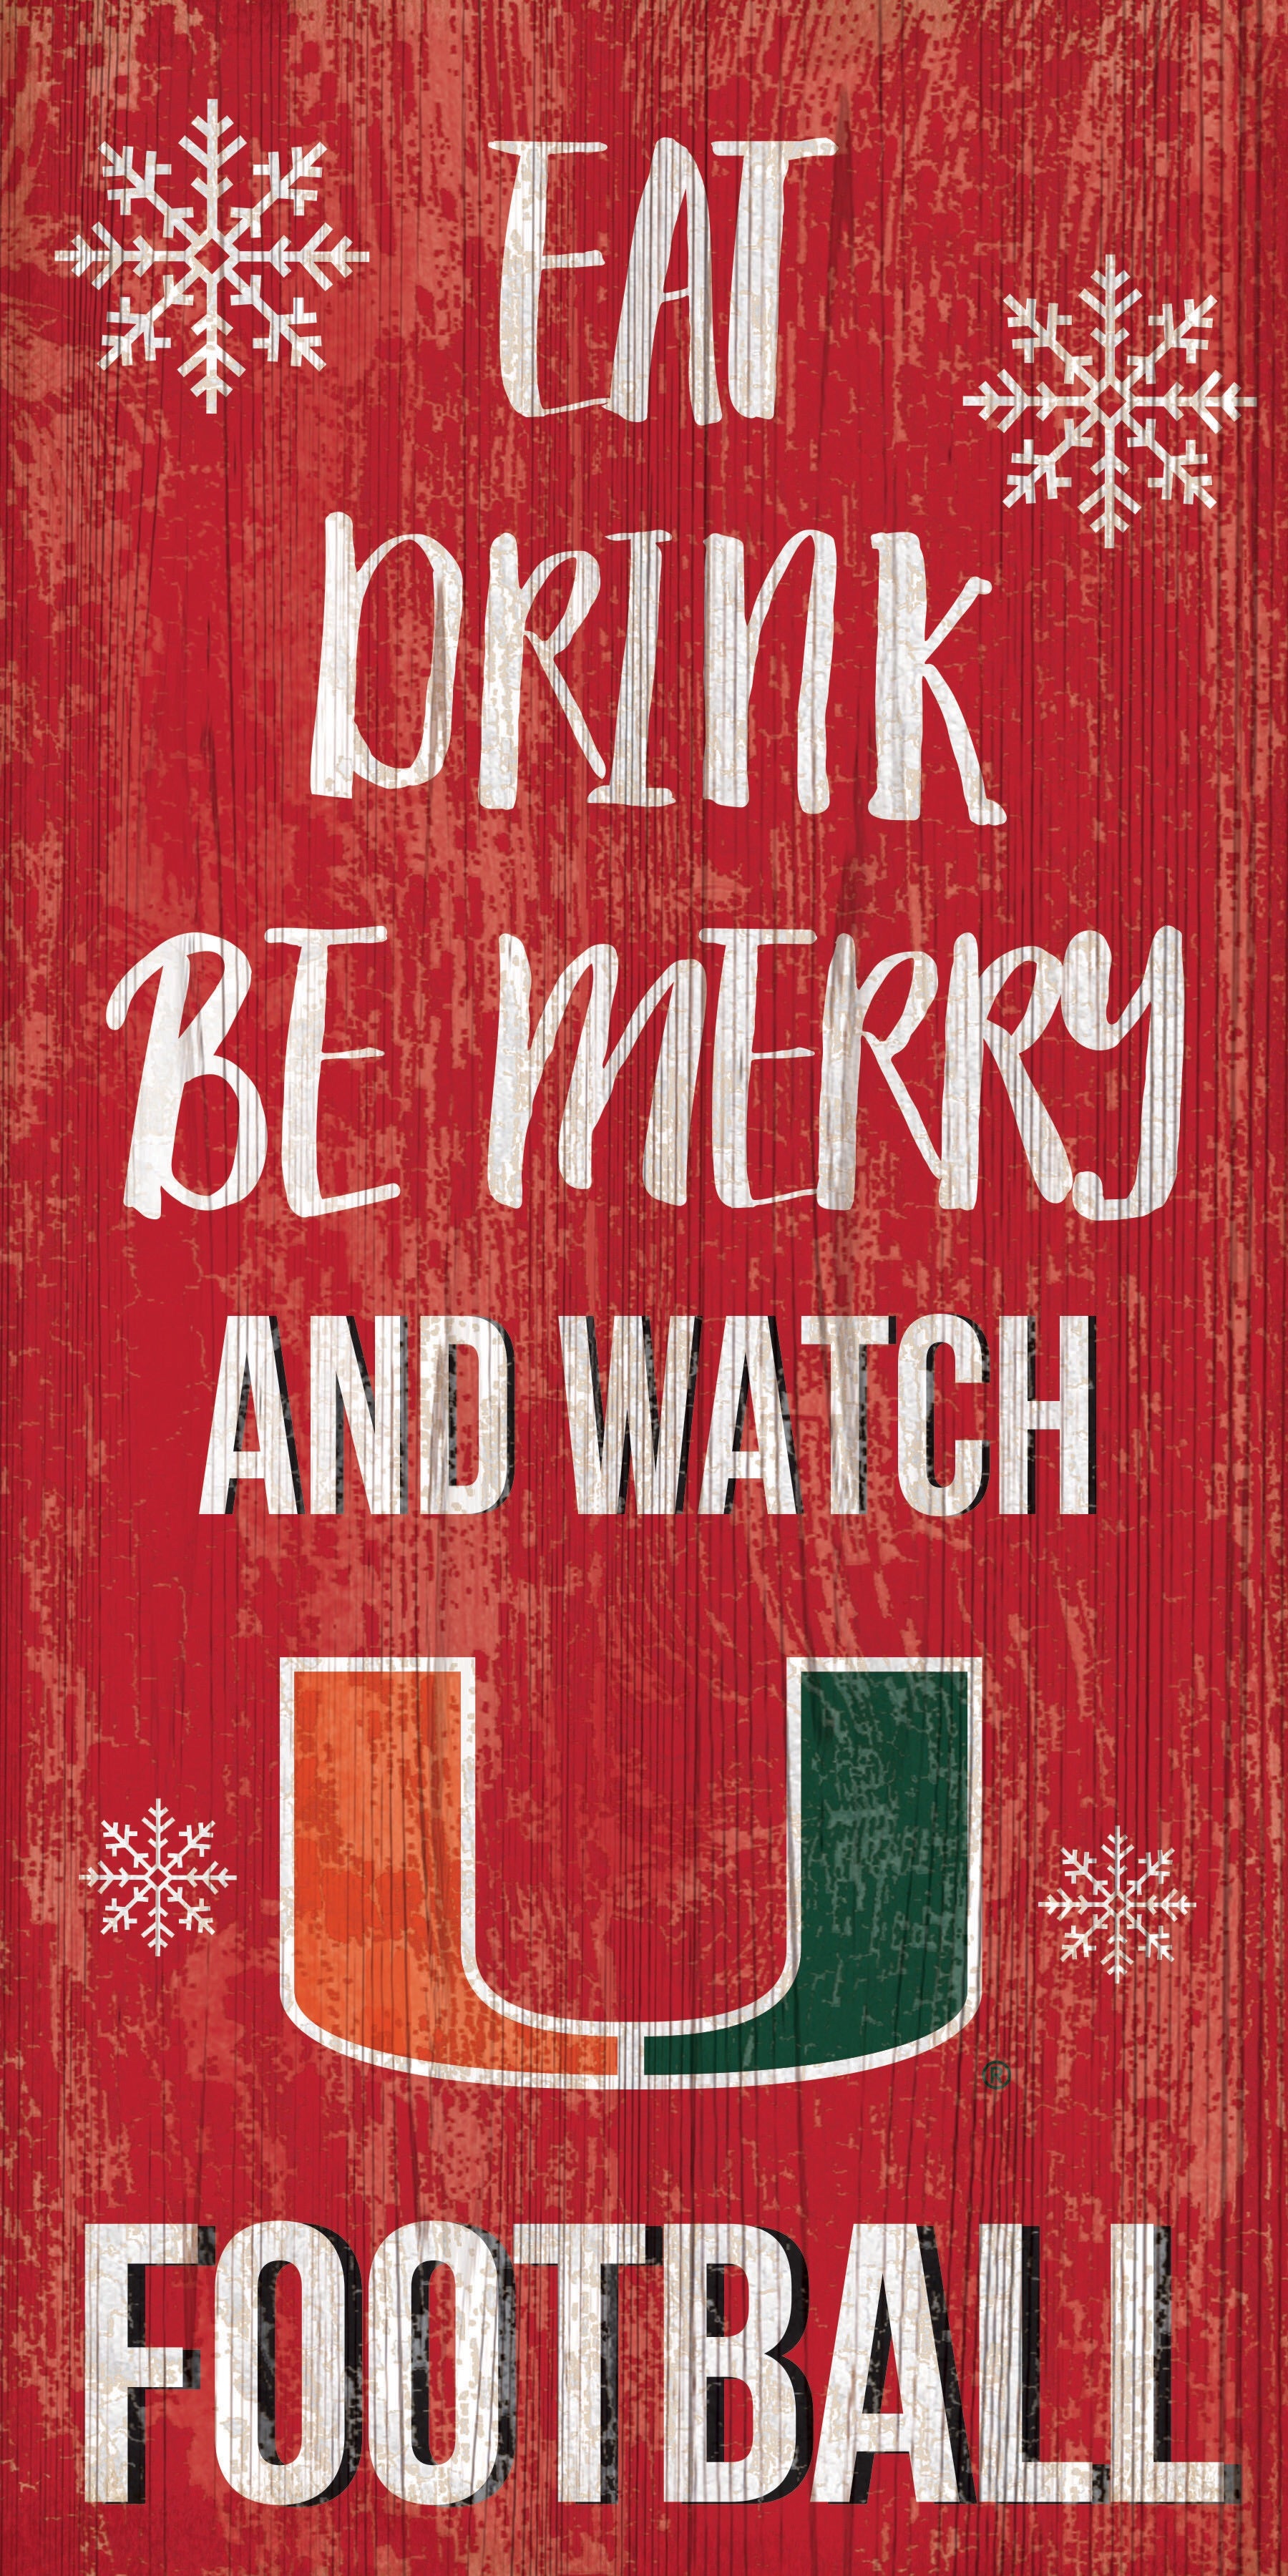 Miami Hurricanes Eat, Drink, Be Merry Wooden Sign - 6" x 12"